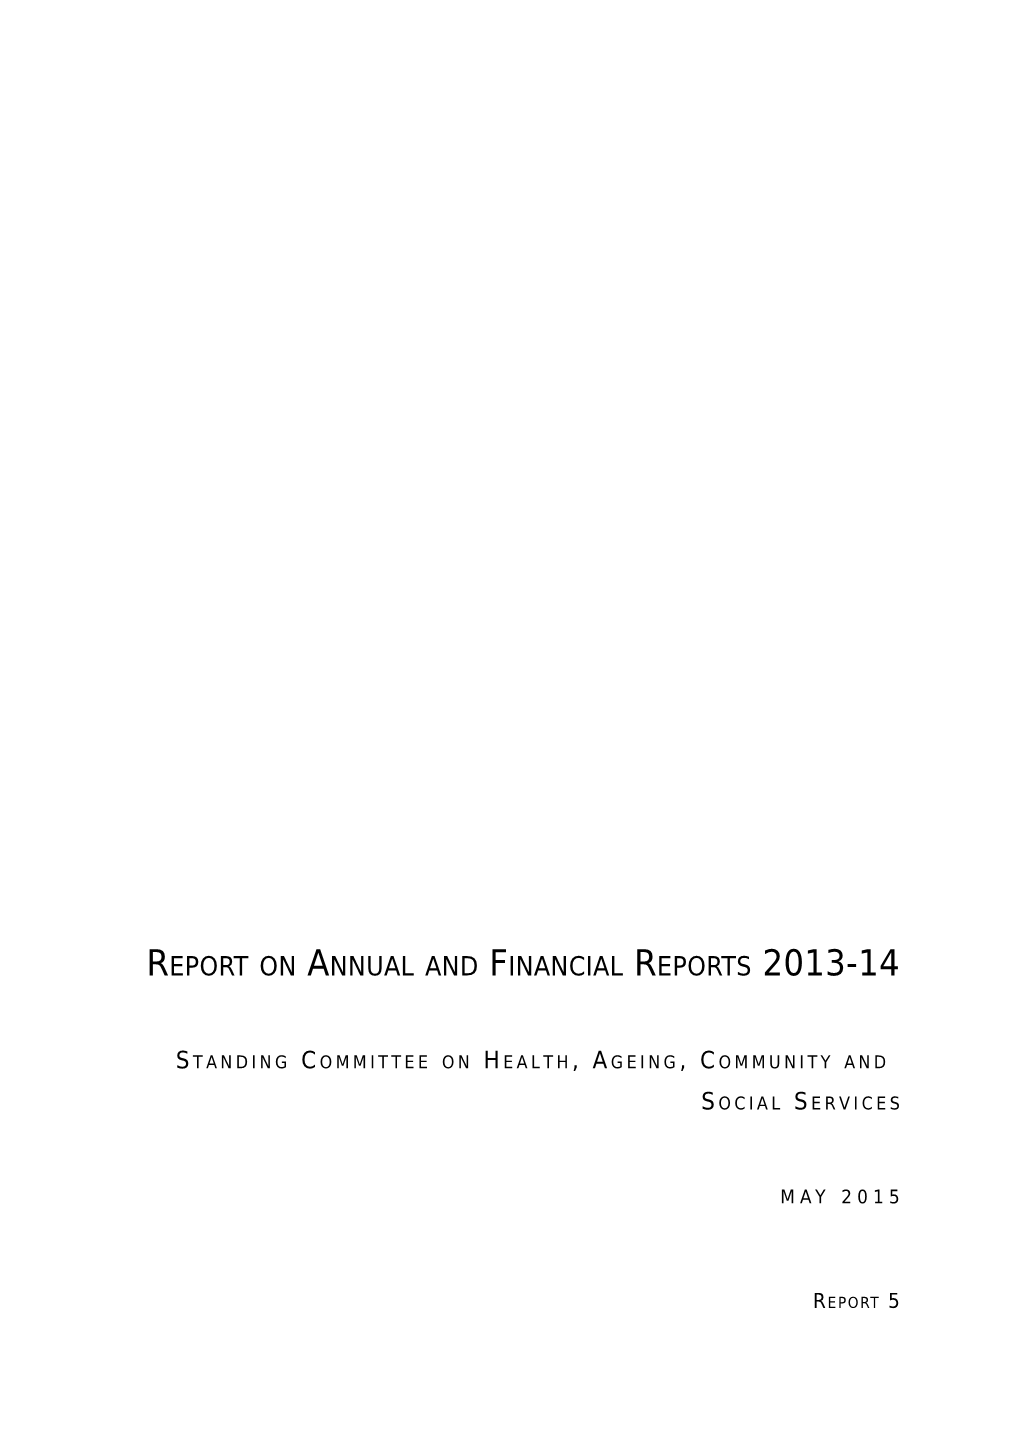 Report on Annual and Financial Reports 2013-14